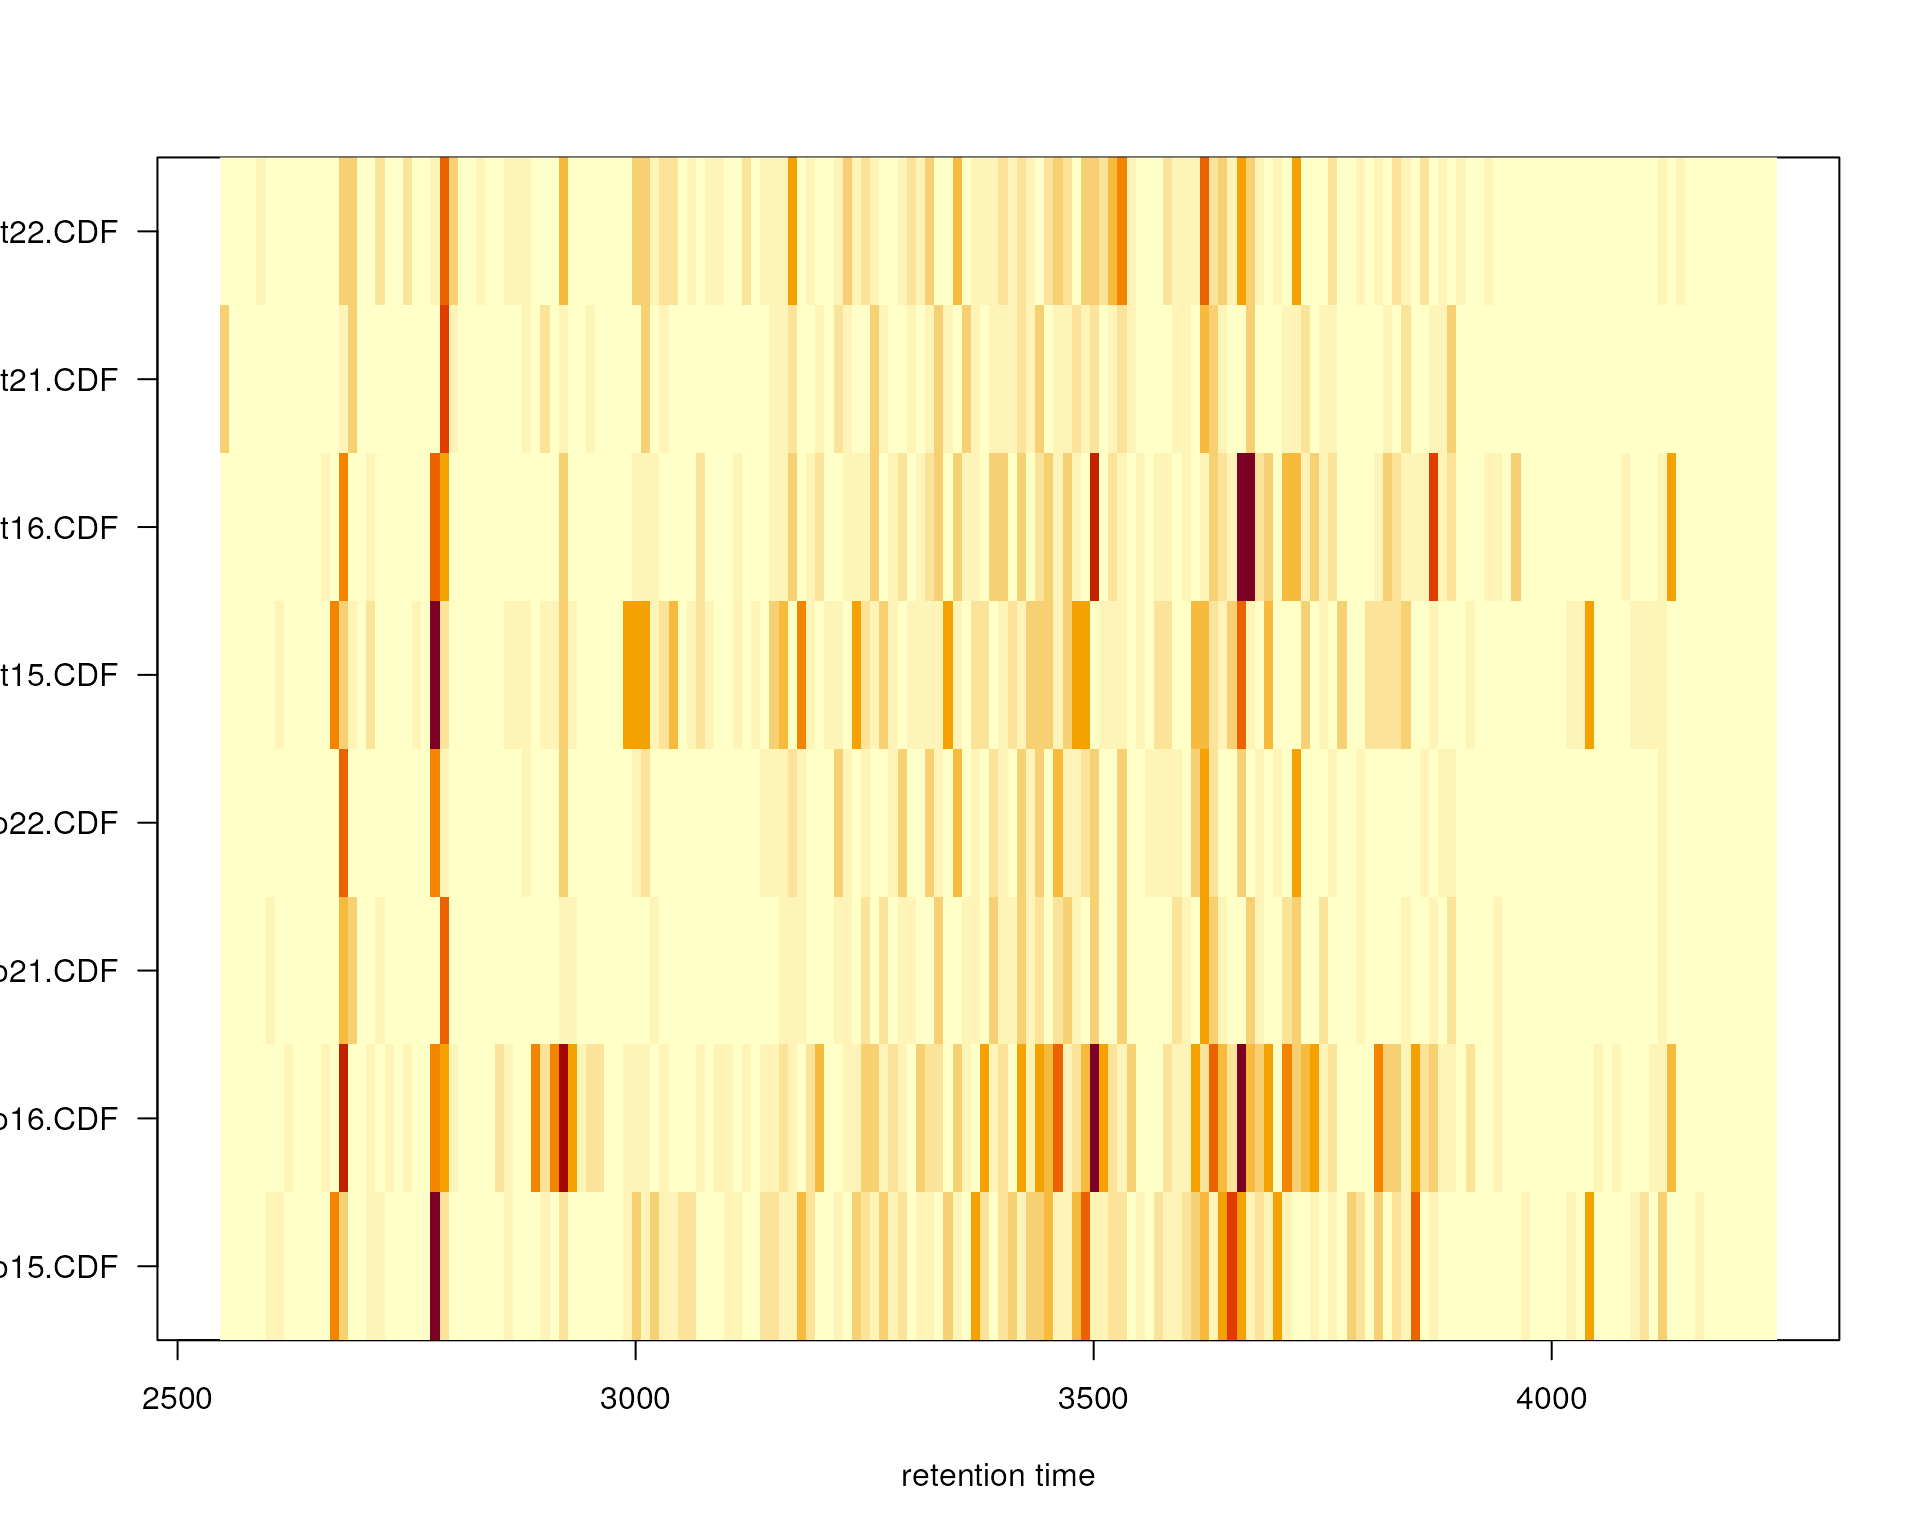 Frequency of identified chromatographic peaks along the retention time axis. The frequency is color coded with higher frequency being represented by yellow-white. Each line shows the peak frequency for one file.